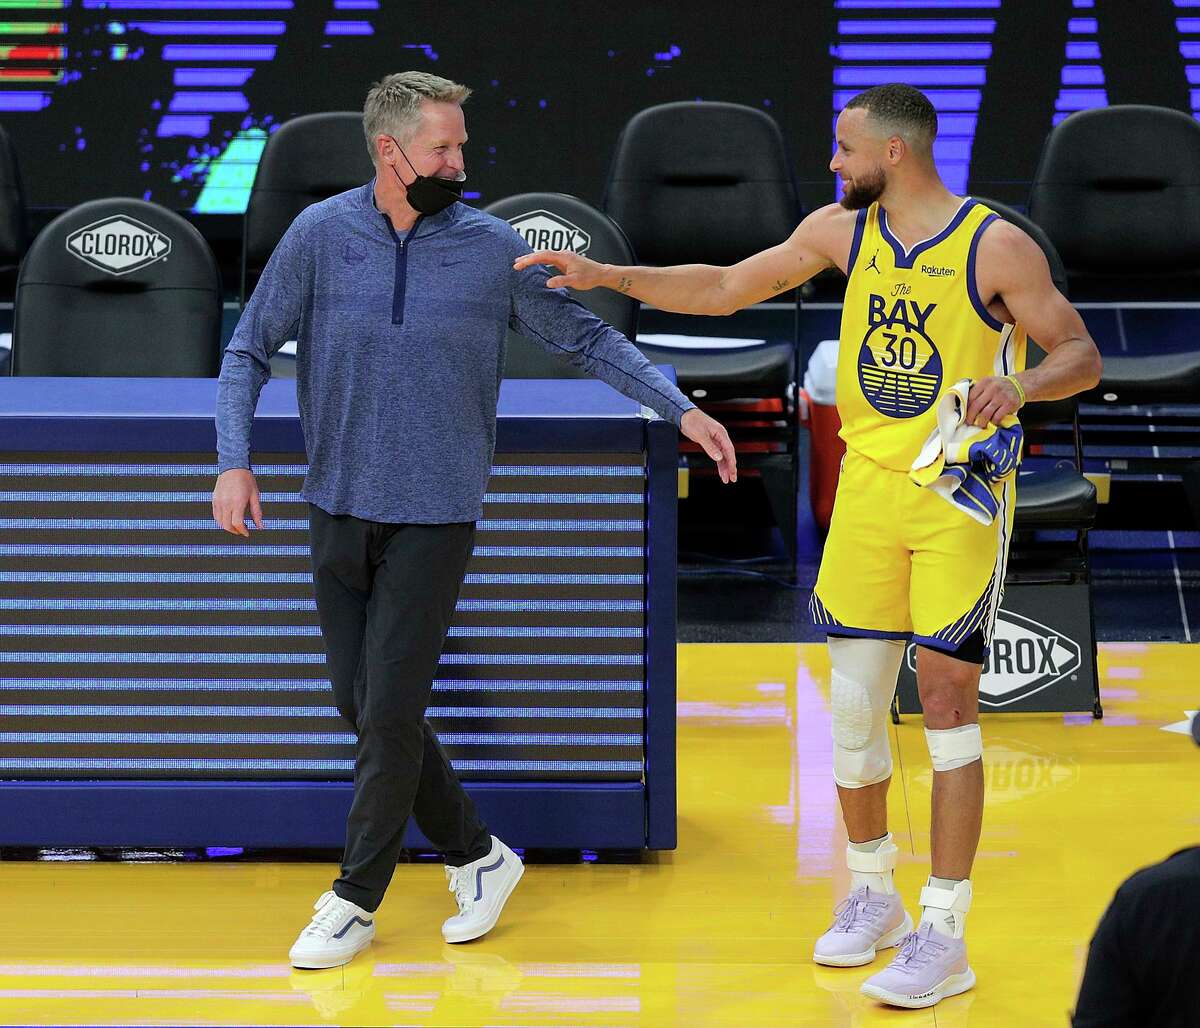 Stephen Curry (30) and head coach Steve Kerr share a smile after the Golden State Warriors defeated the Sacramento Kings 117-113 at Chase Center in San Francisco Calif., on Sunday, April 25, 2021.